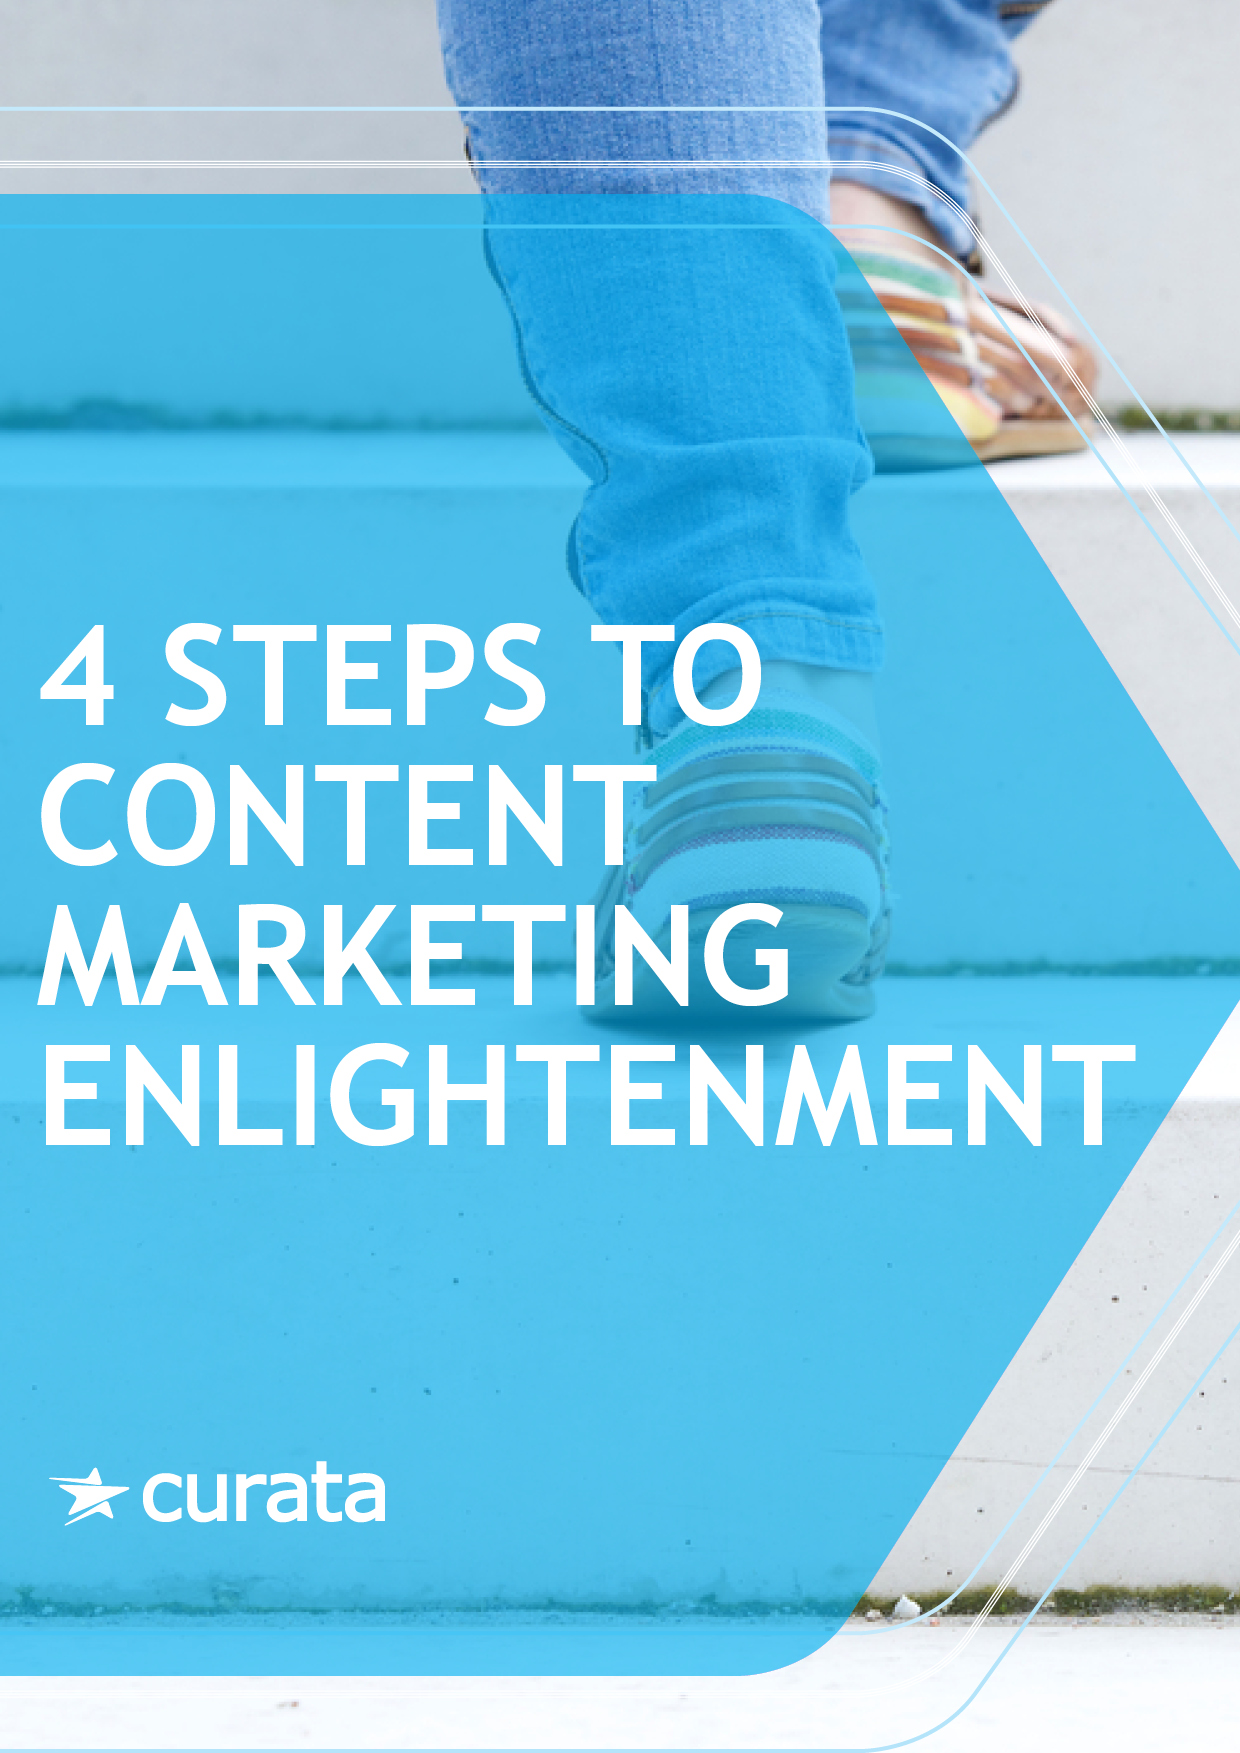 4 Steps to Content Marketing Enlightenment